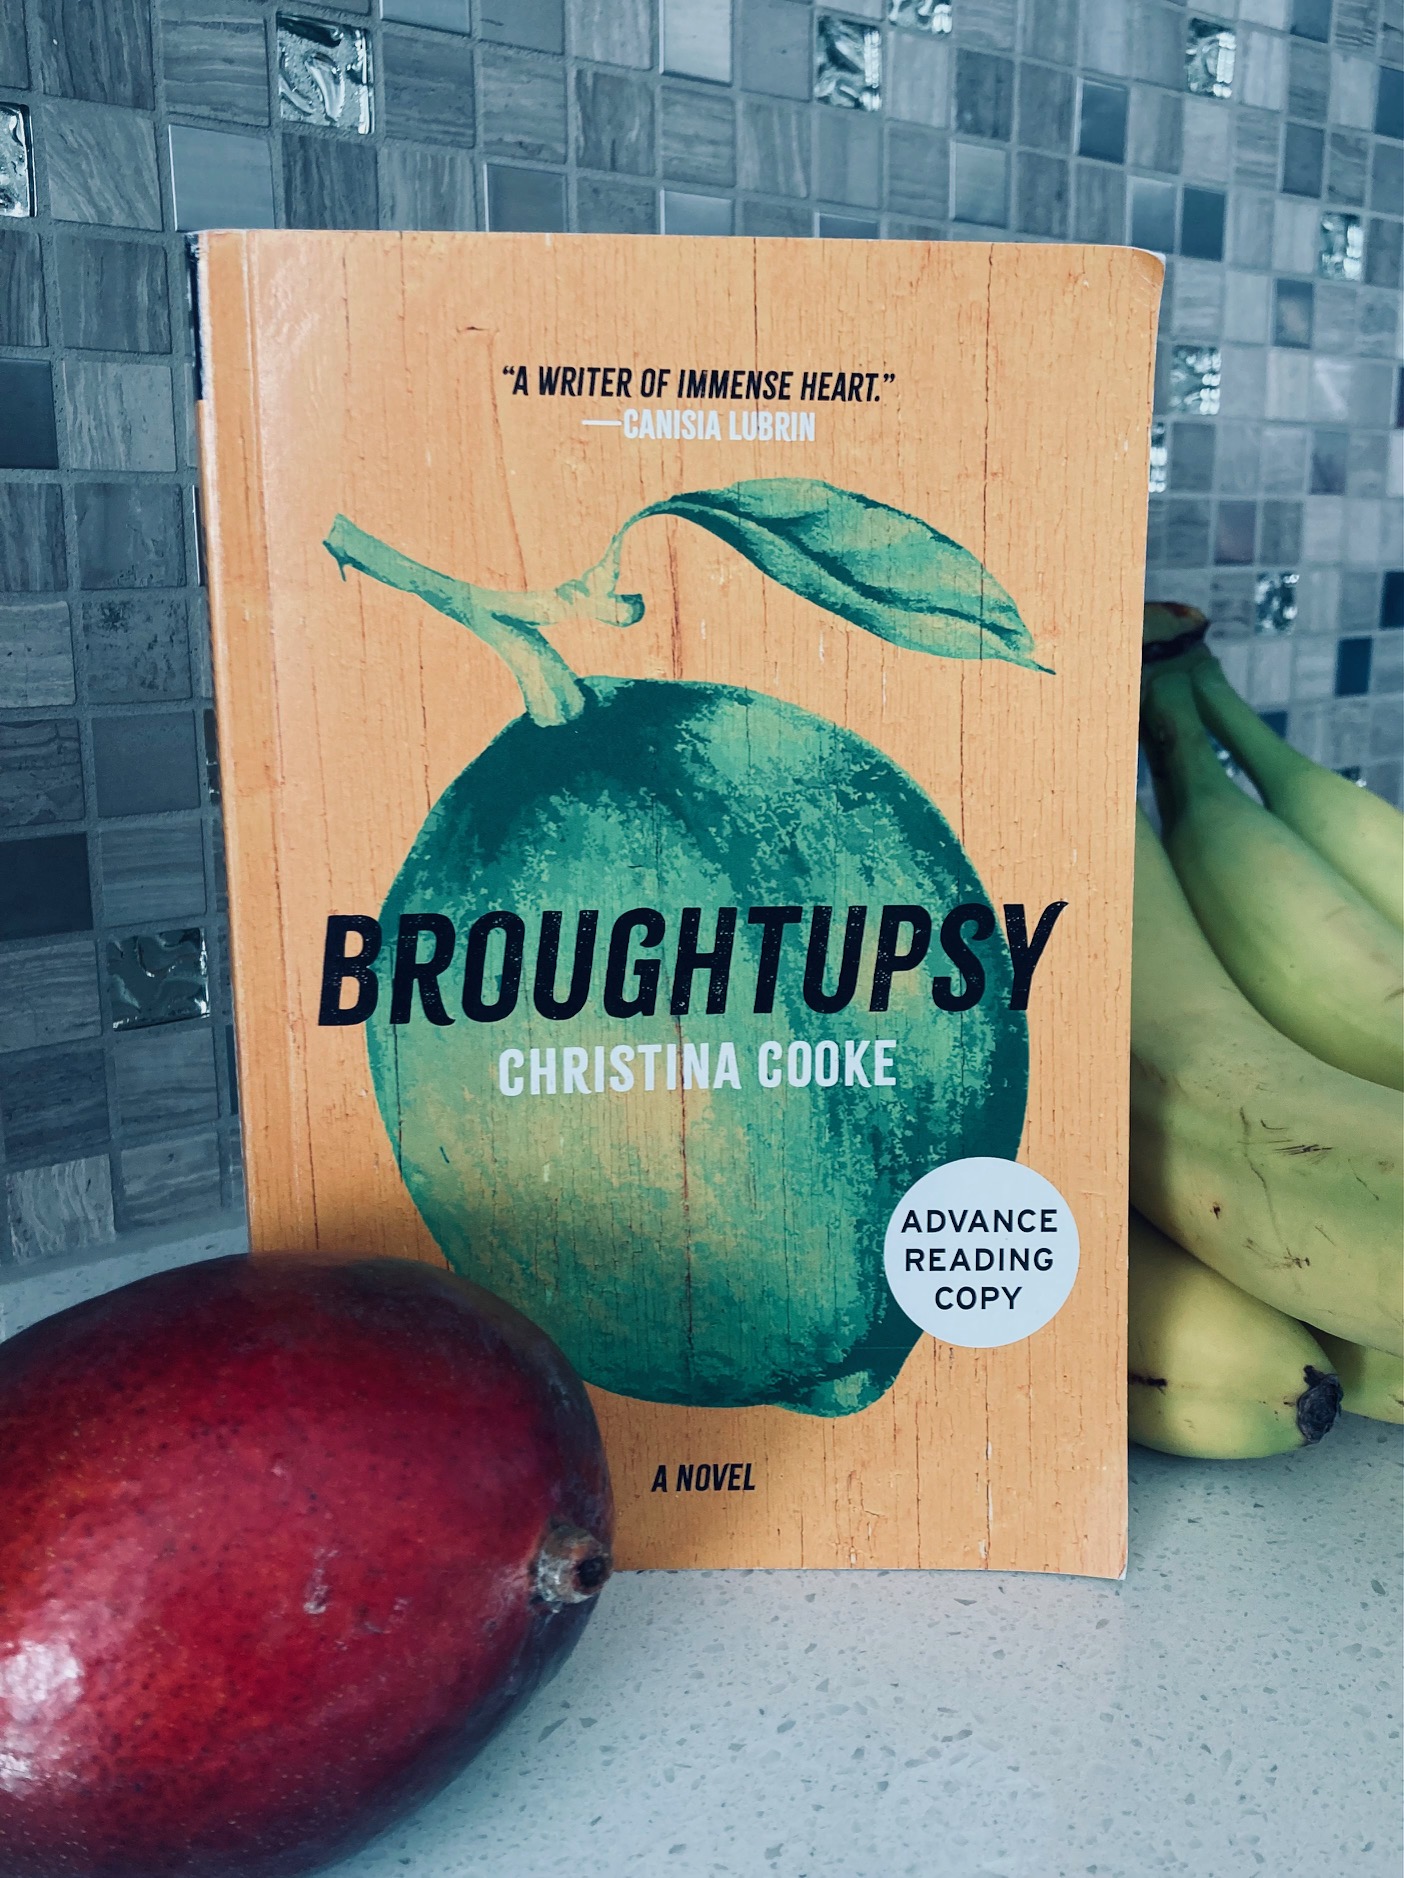 Broughtupsy by Christina Cooke book